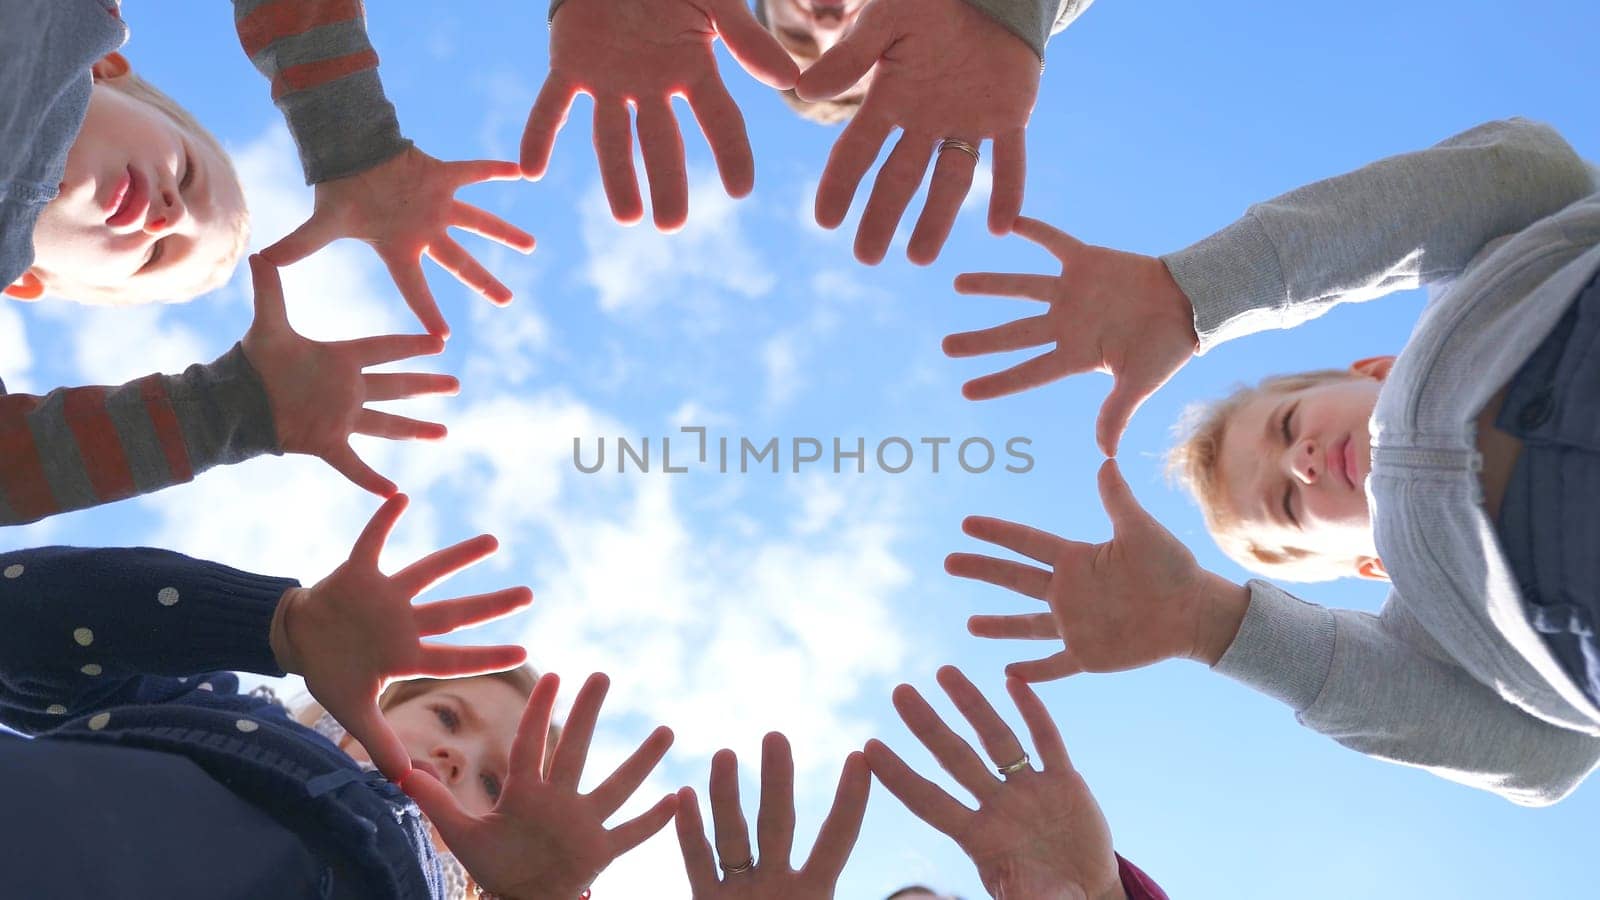 A friendly large family makes a circle shape out of the palms of their hands